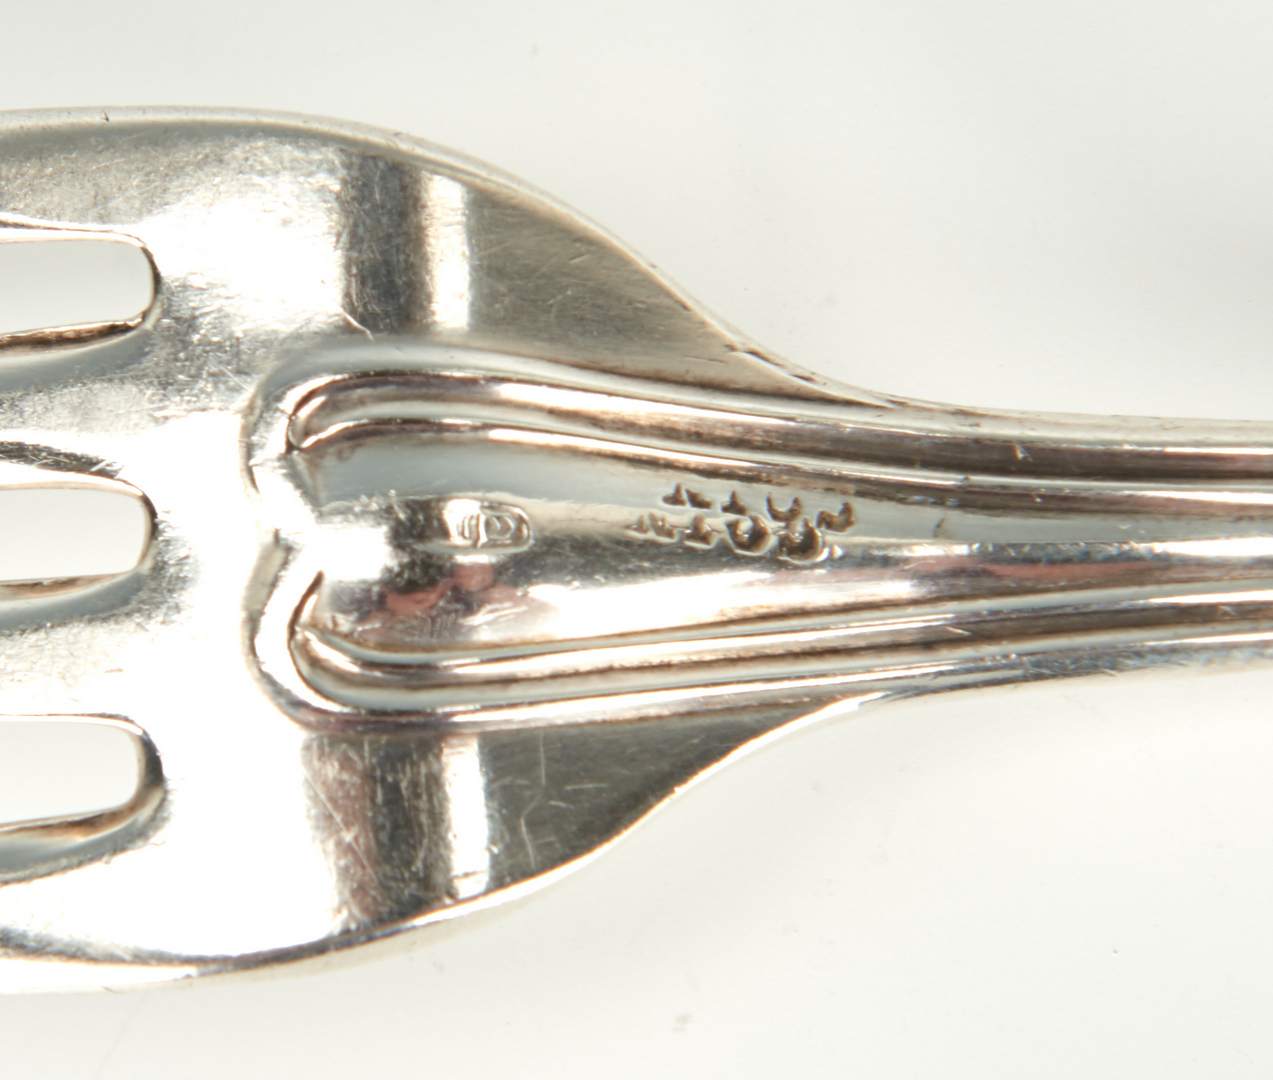 Lot 75: Two Coin Silver Forks, Bell & Bros. TX